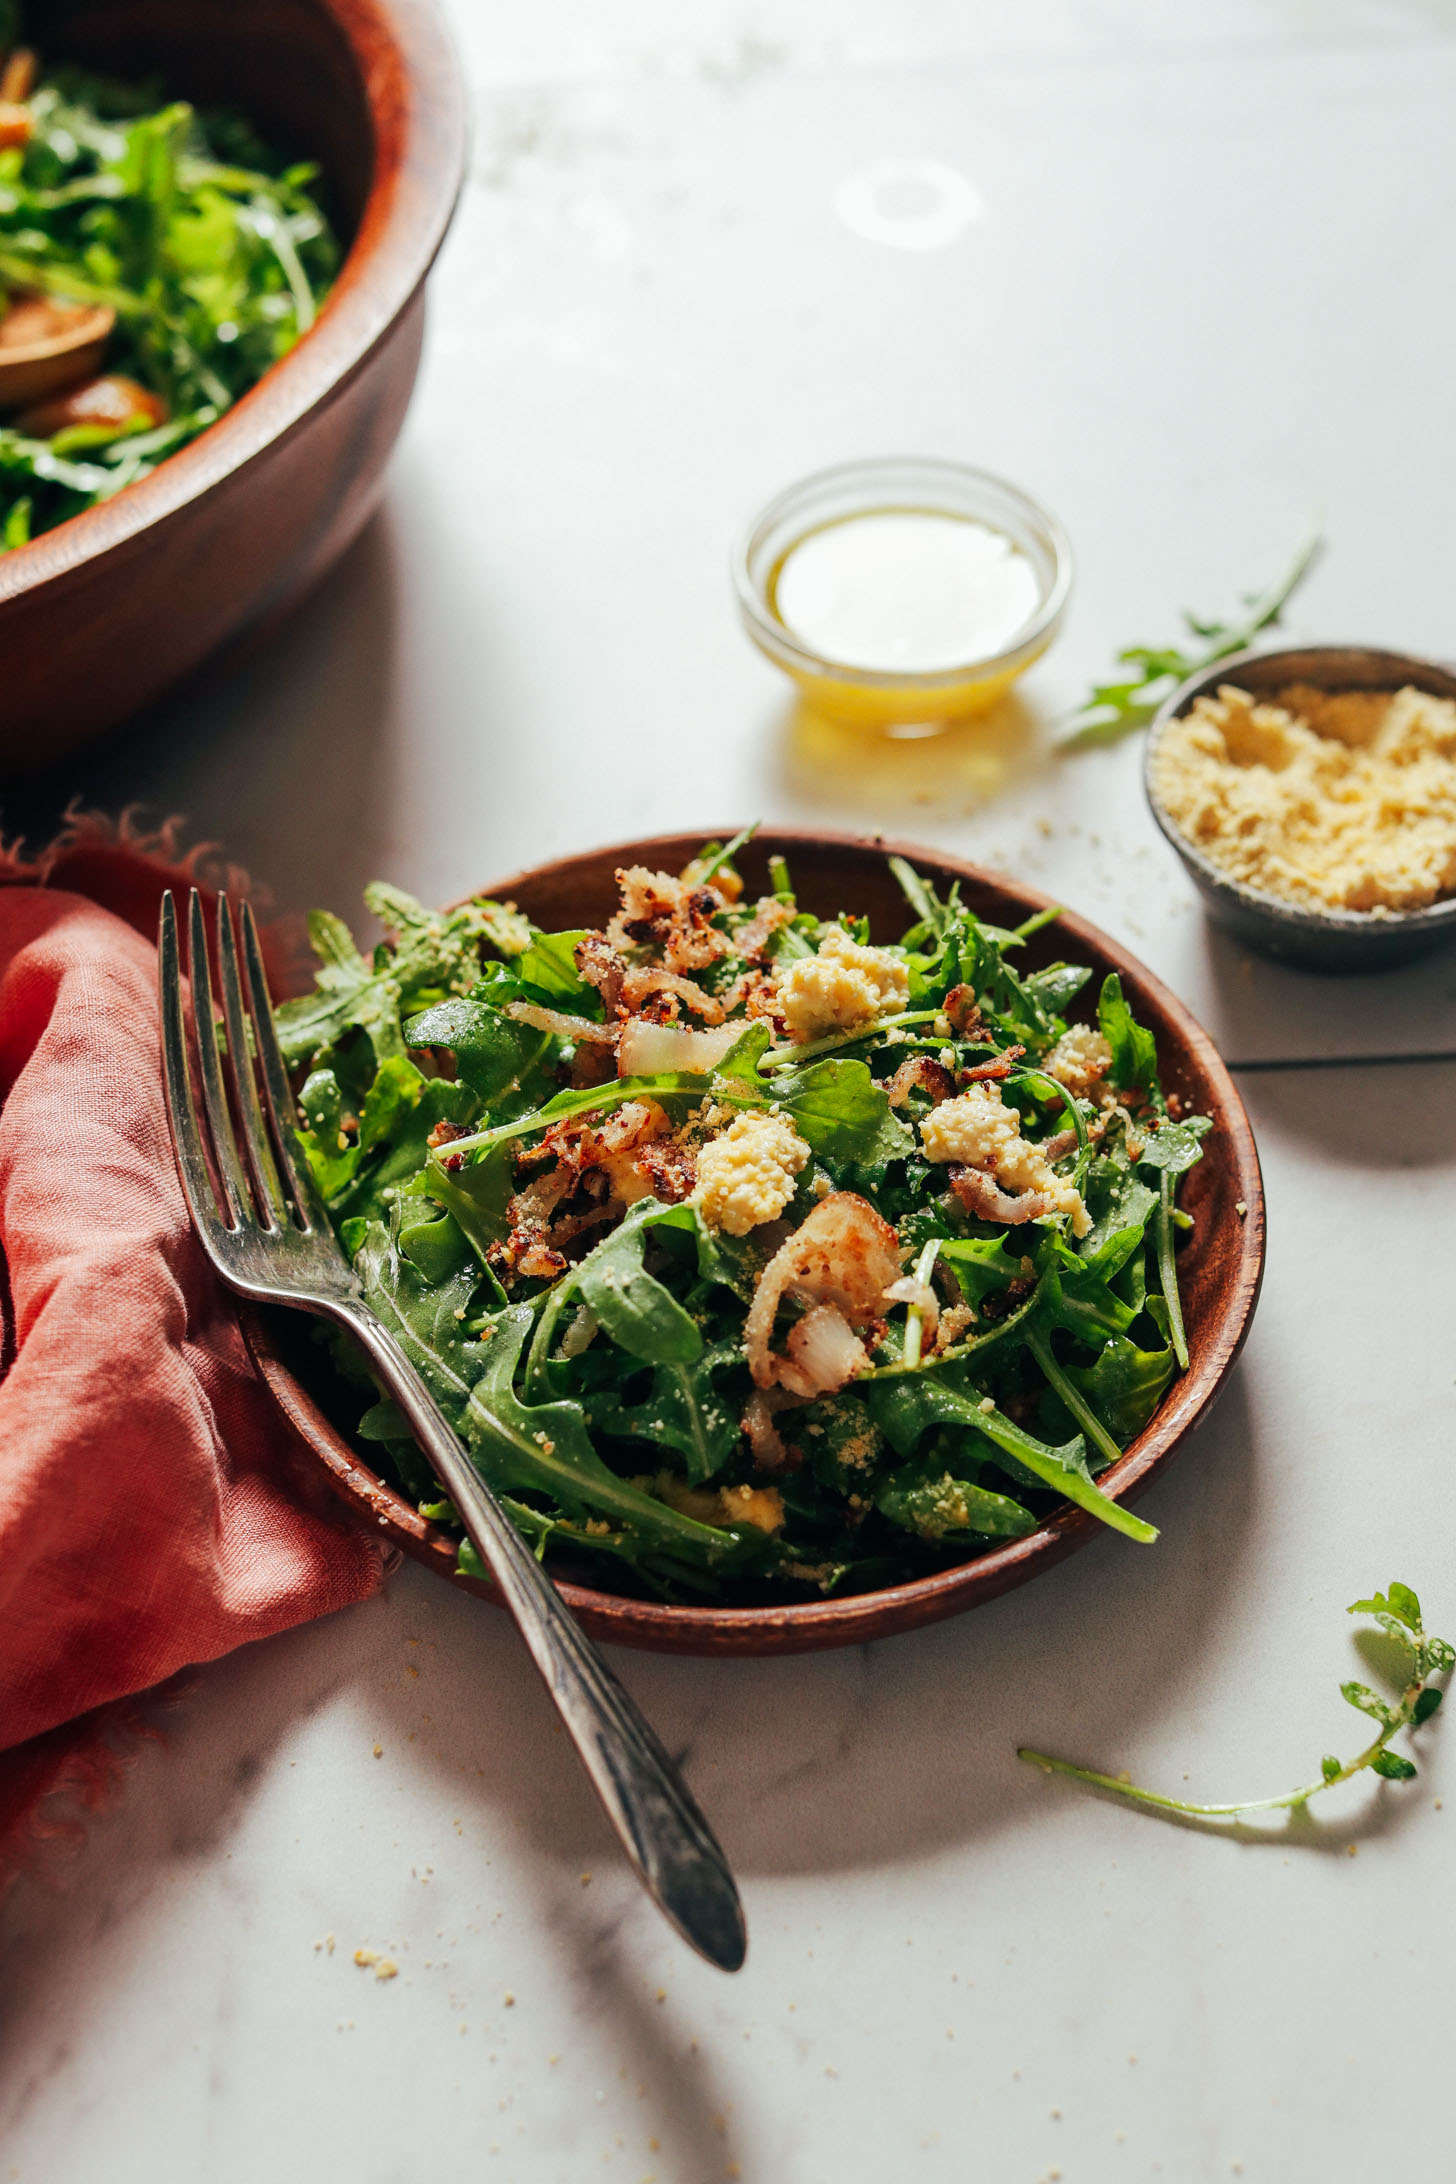 Wooden salad plate with a serving of our Lemony Arugula Salad with Crispy Shallot recipe